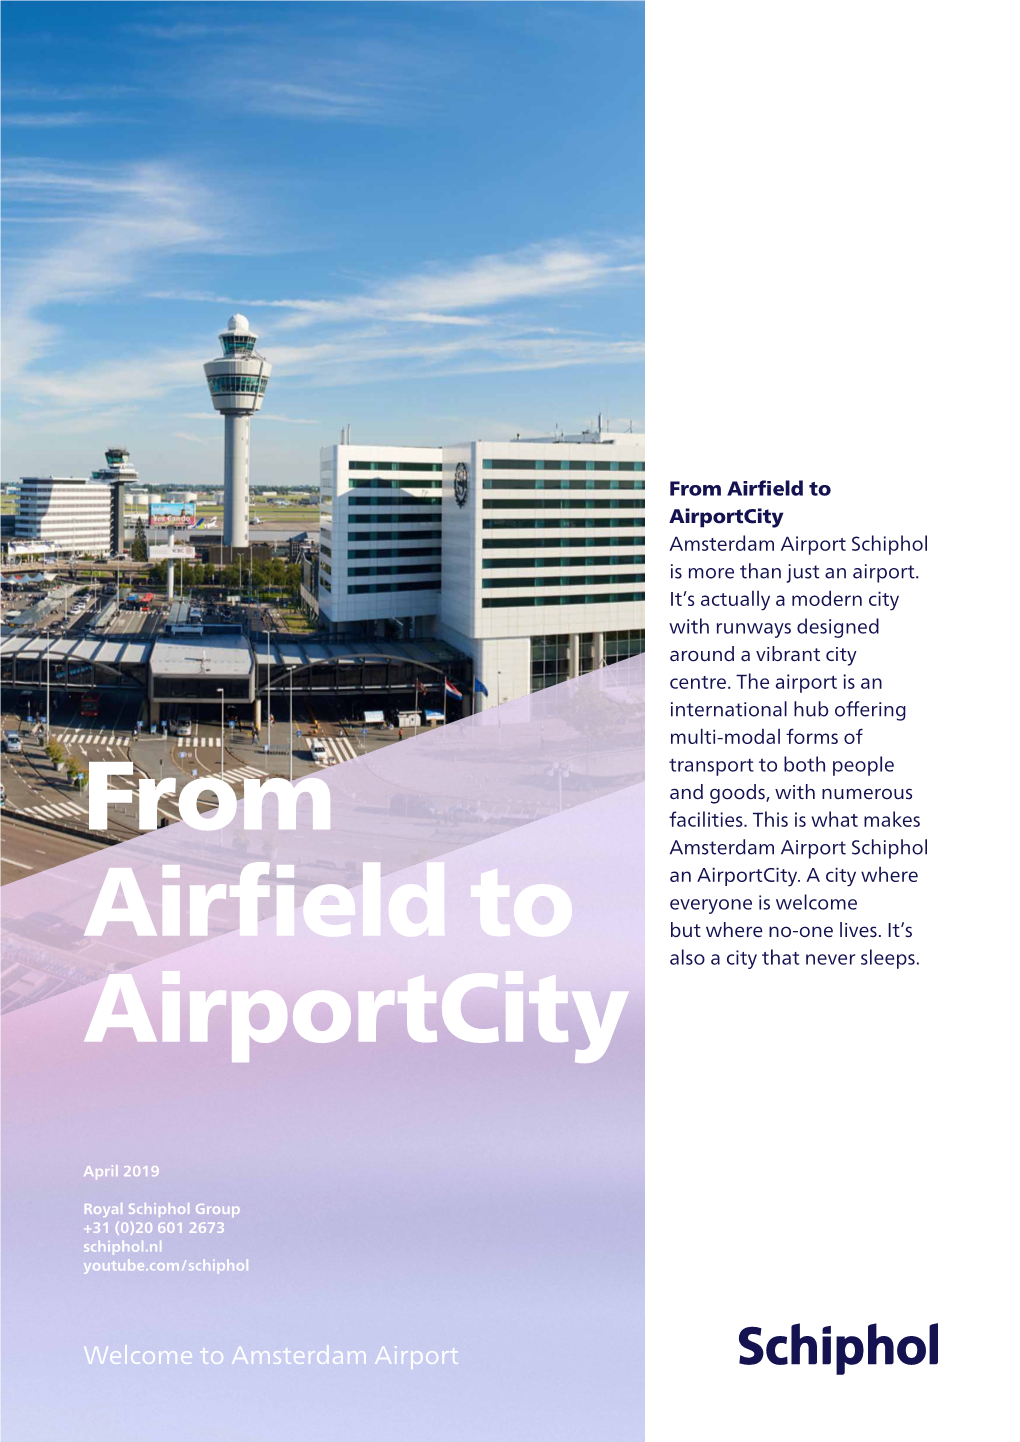 From Airfield to Airportcity Amsterdam Airport Schiphol Is More Than Just an Airport